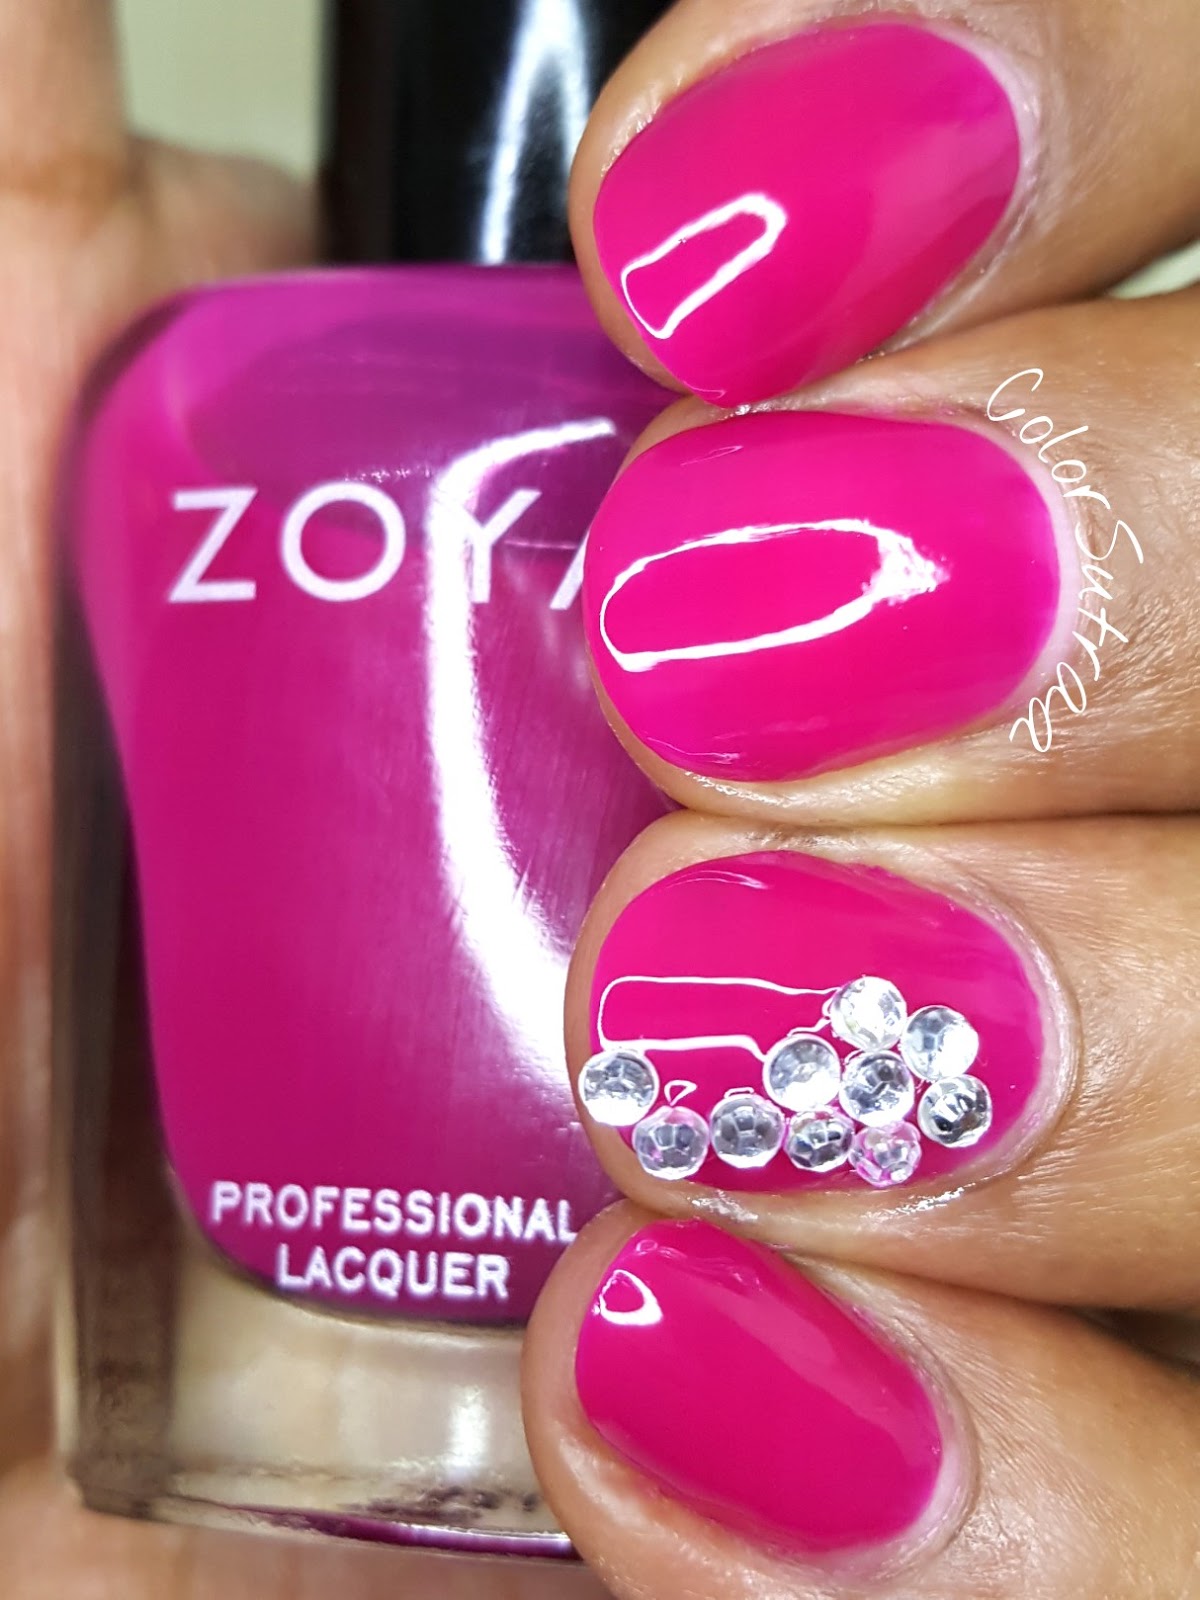 Throwback Thursday - Zoya Diva Nail Polish Swatches & Review : All  Lacquered Up